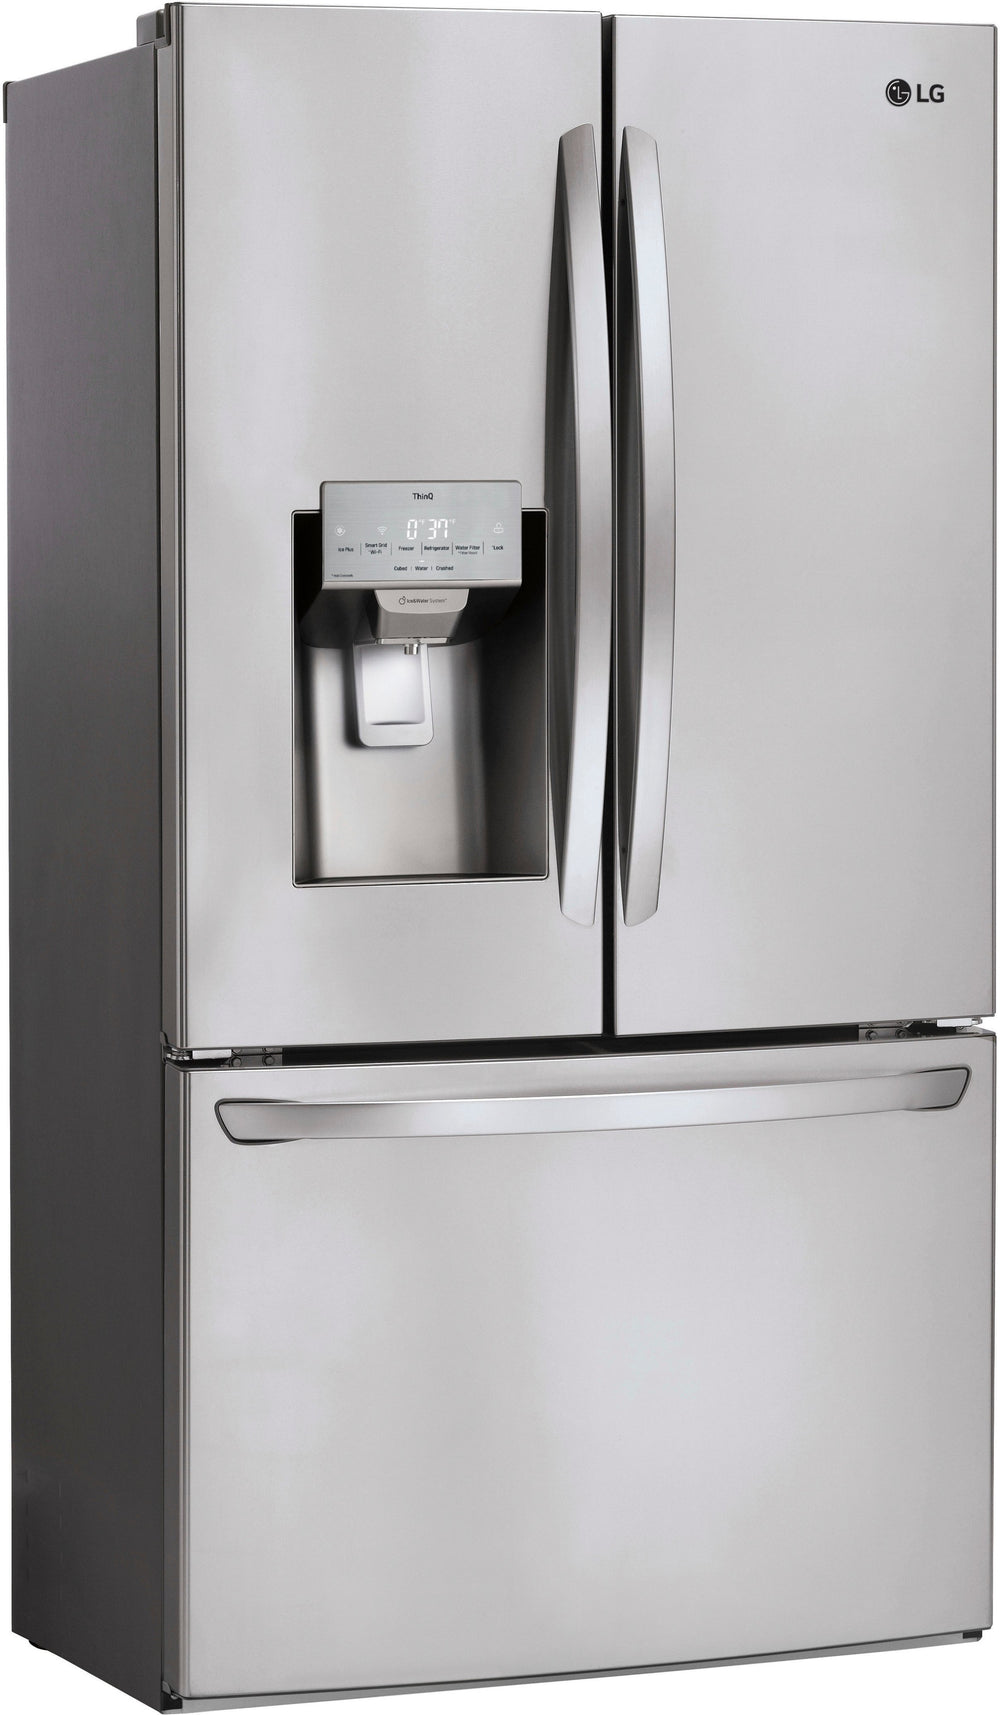 LG - 27.7 Cu. Ft. French Door Smart Refrigerator with External Ice and Water - Stainless steel_1